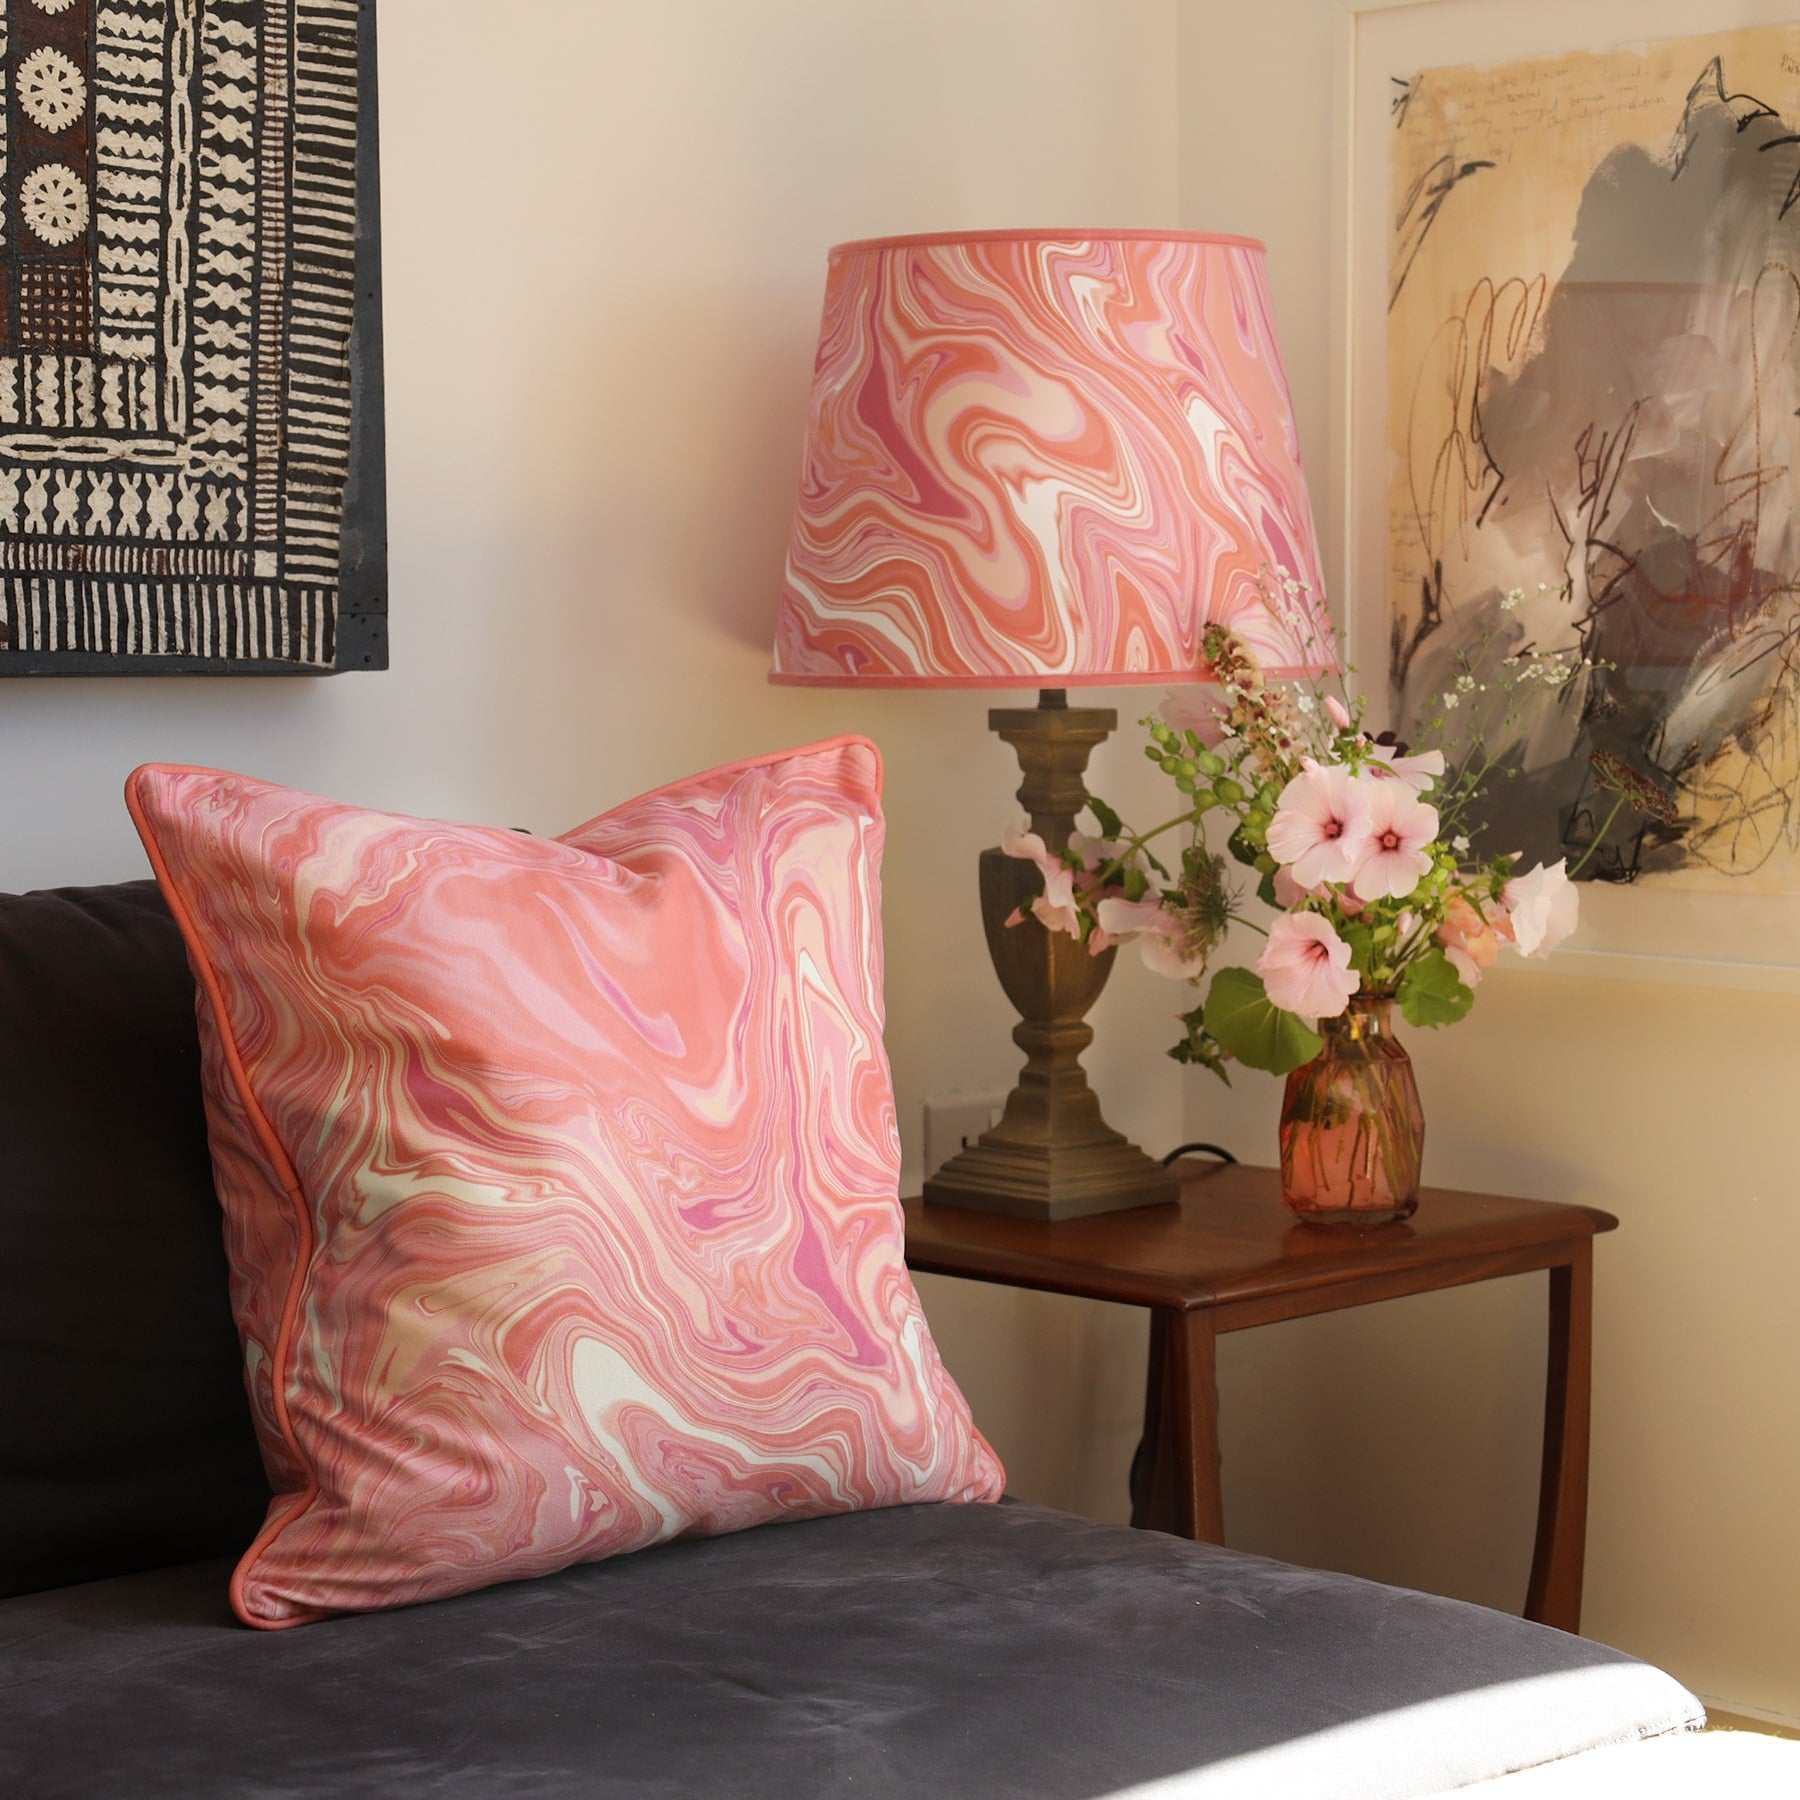 Marble,swirl cushion in Sundowner colours in pinks/whites and coral placed on a bed next to a matching lampshade and a vase on a table.